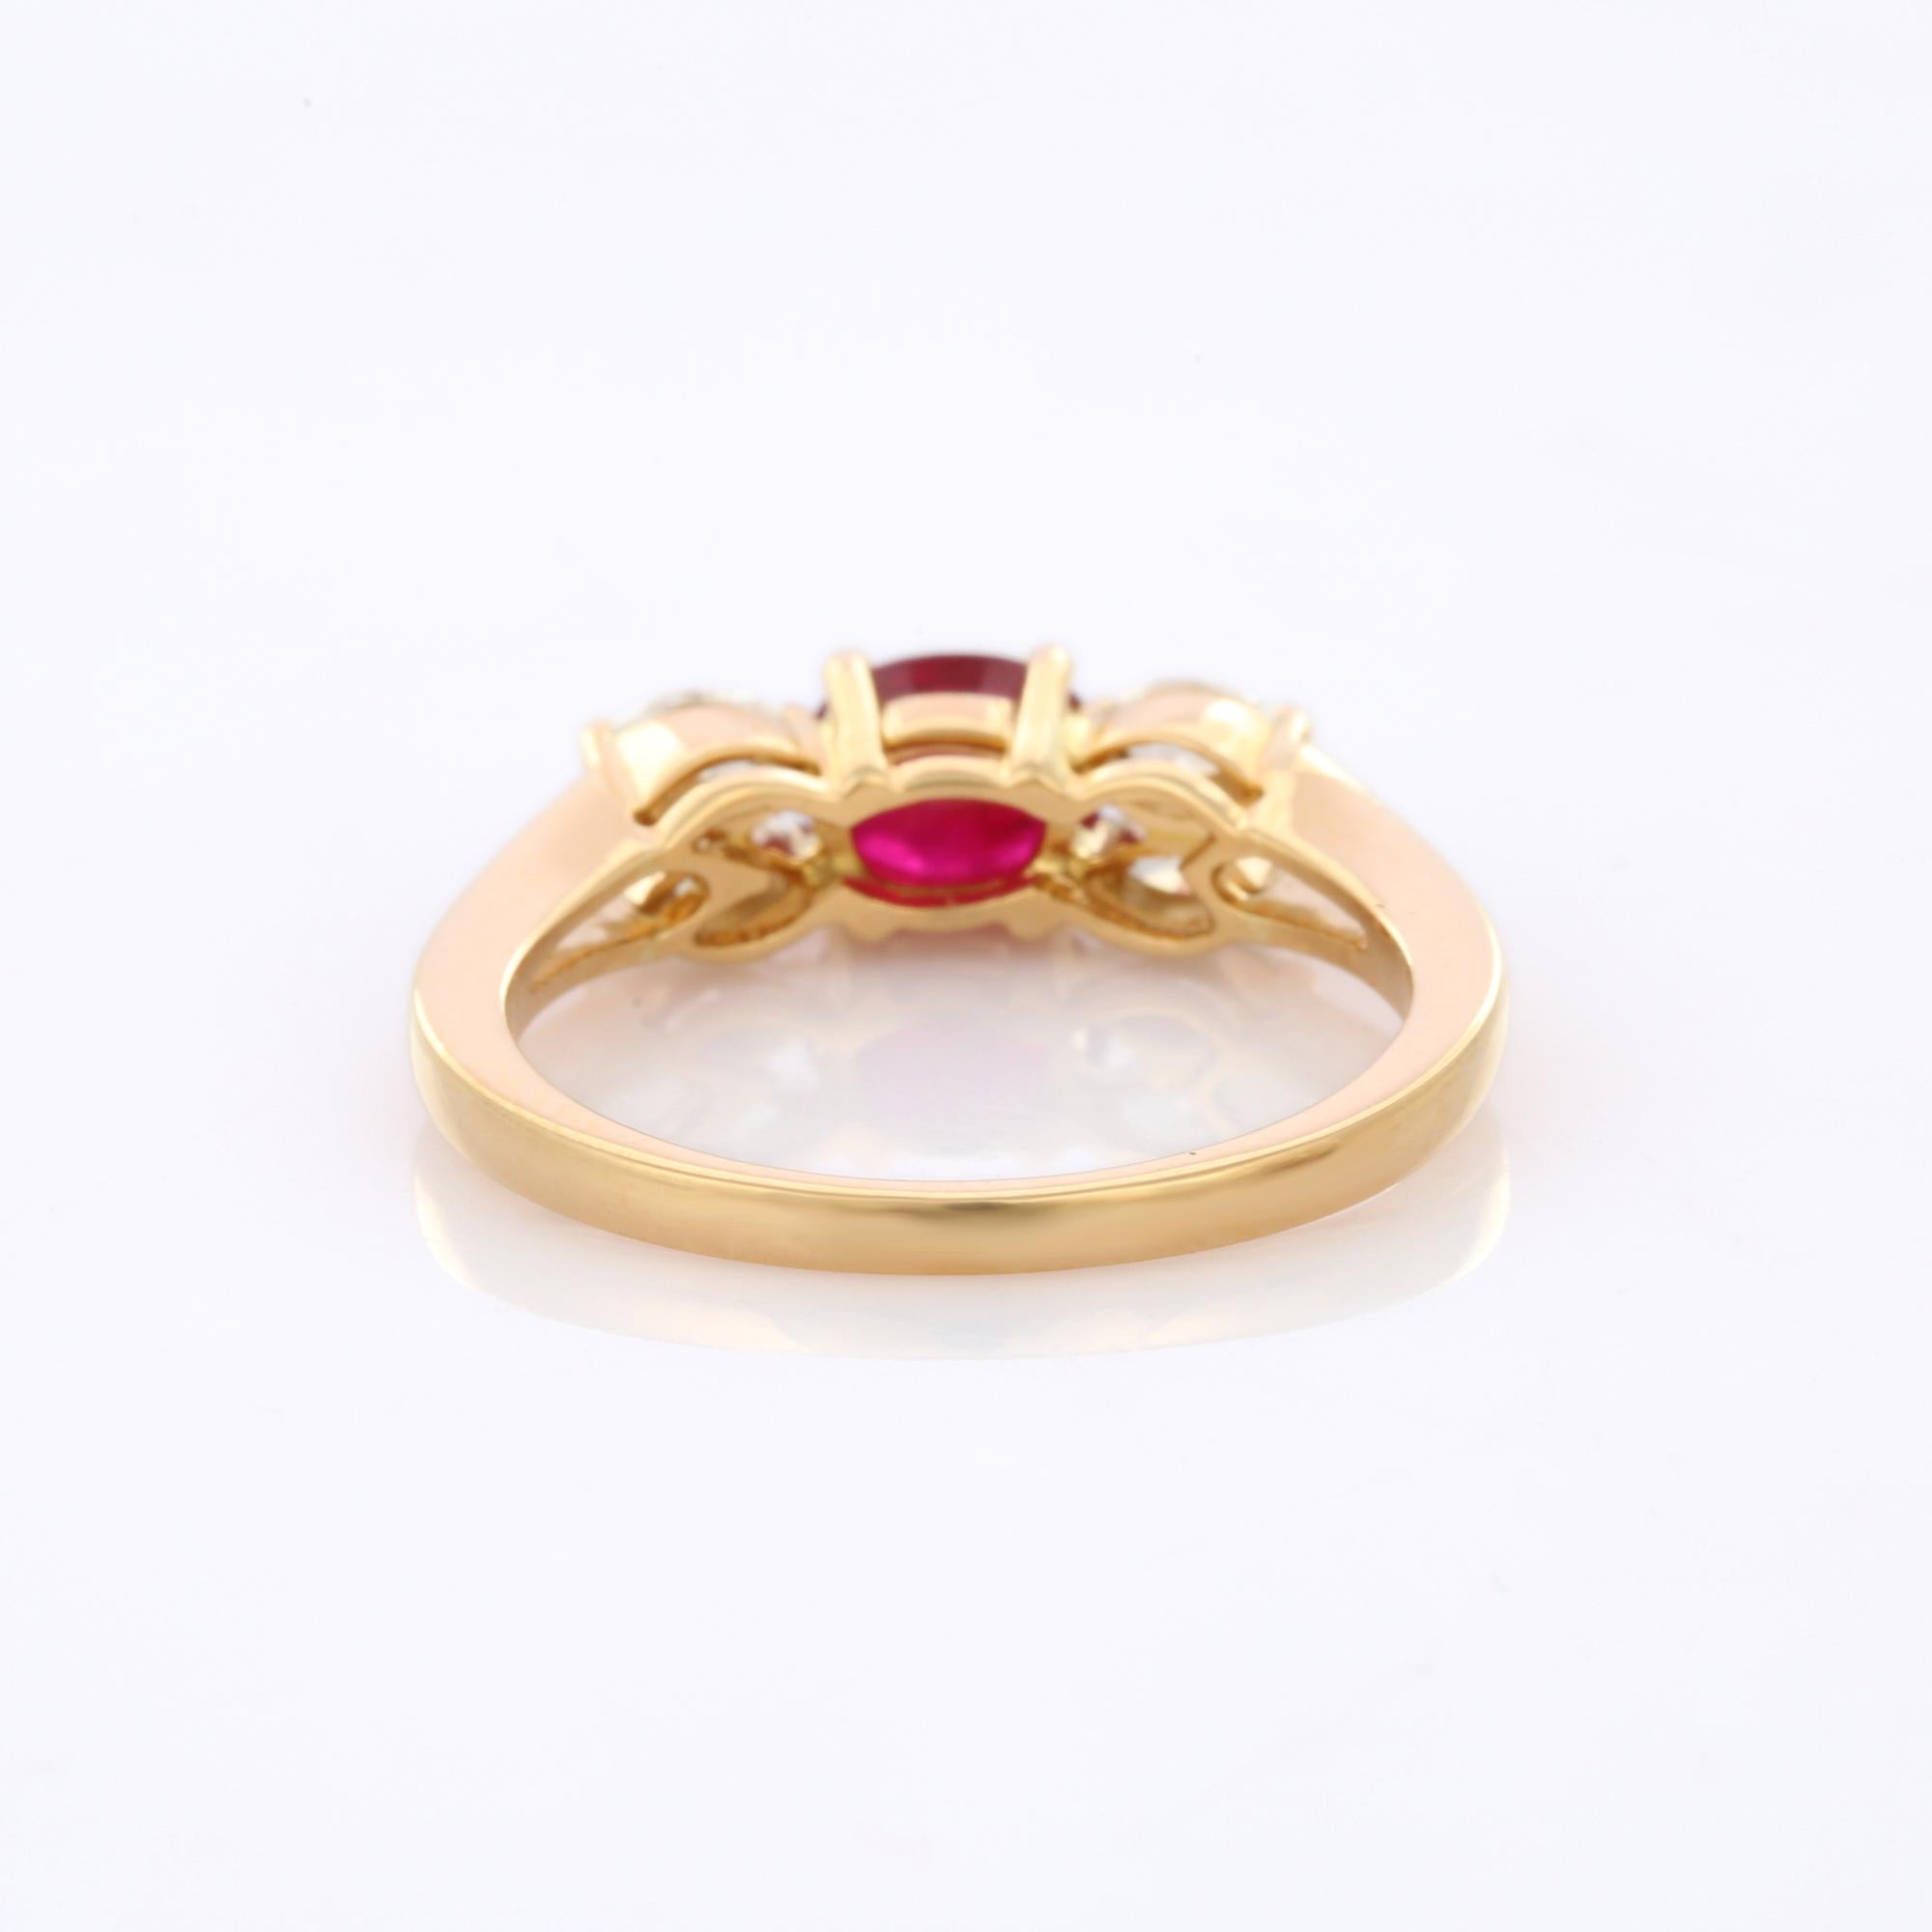 For Sale:  Astonishing Oval Cut Ruby Gemstone and Diamond Ring in 18K Solid Yellow Gold  4